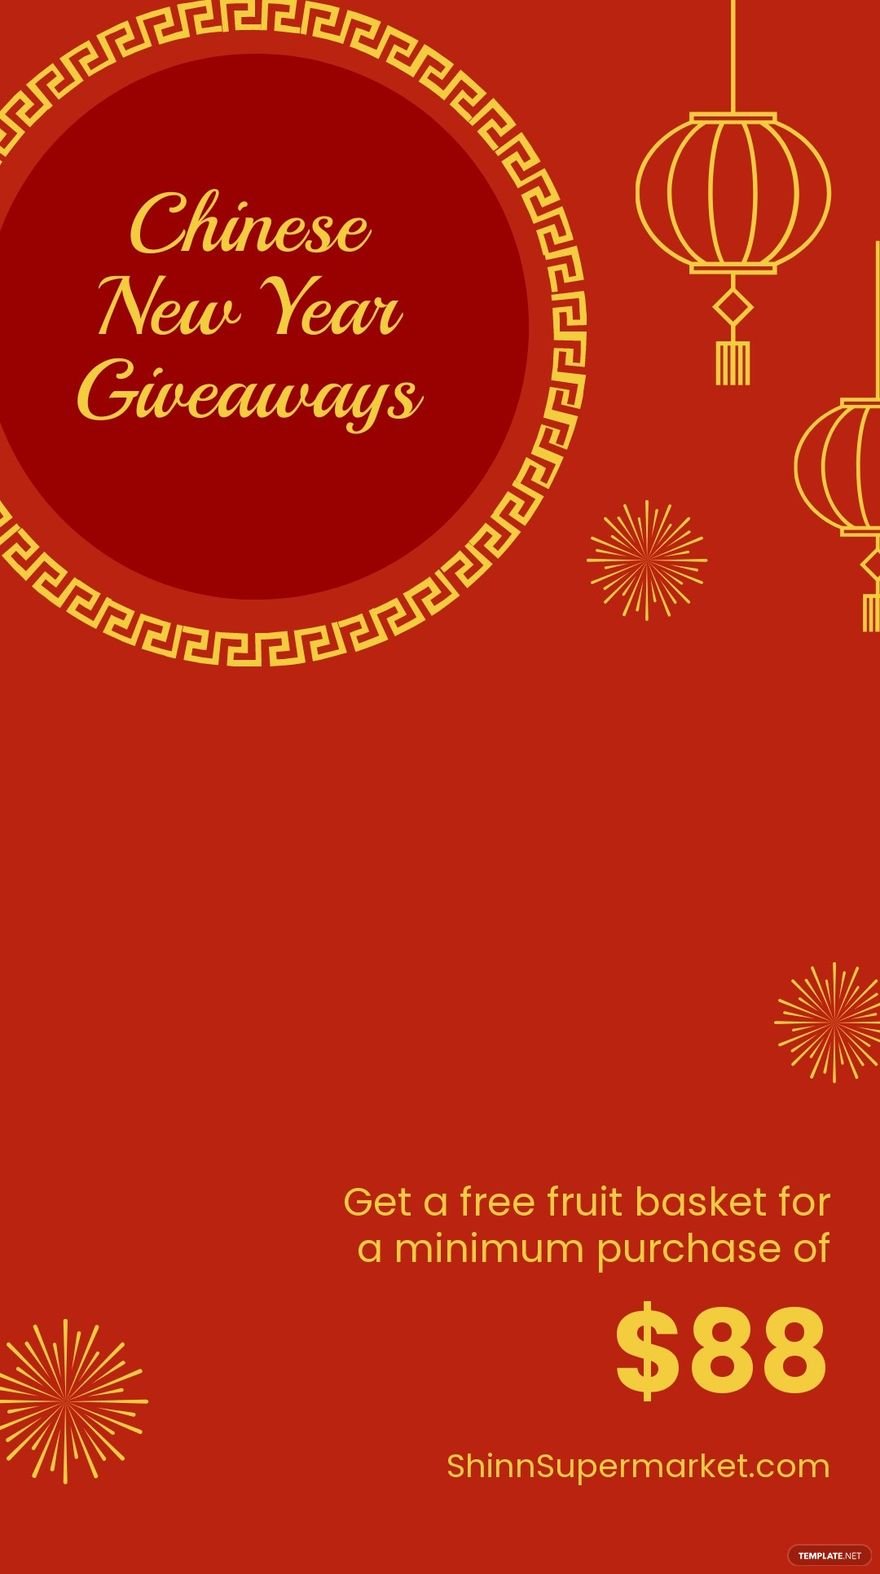 Free Chinese New Year Giveaway Snapchat Geofilter Template